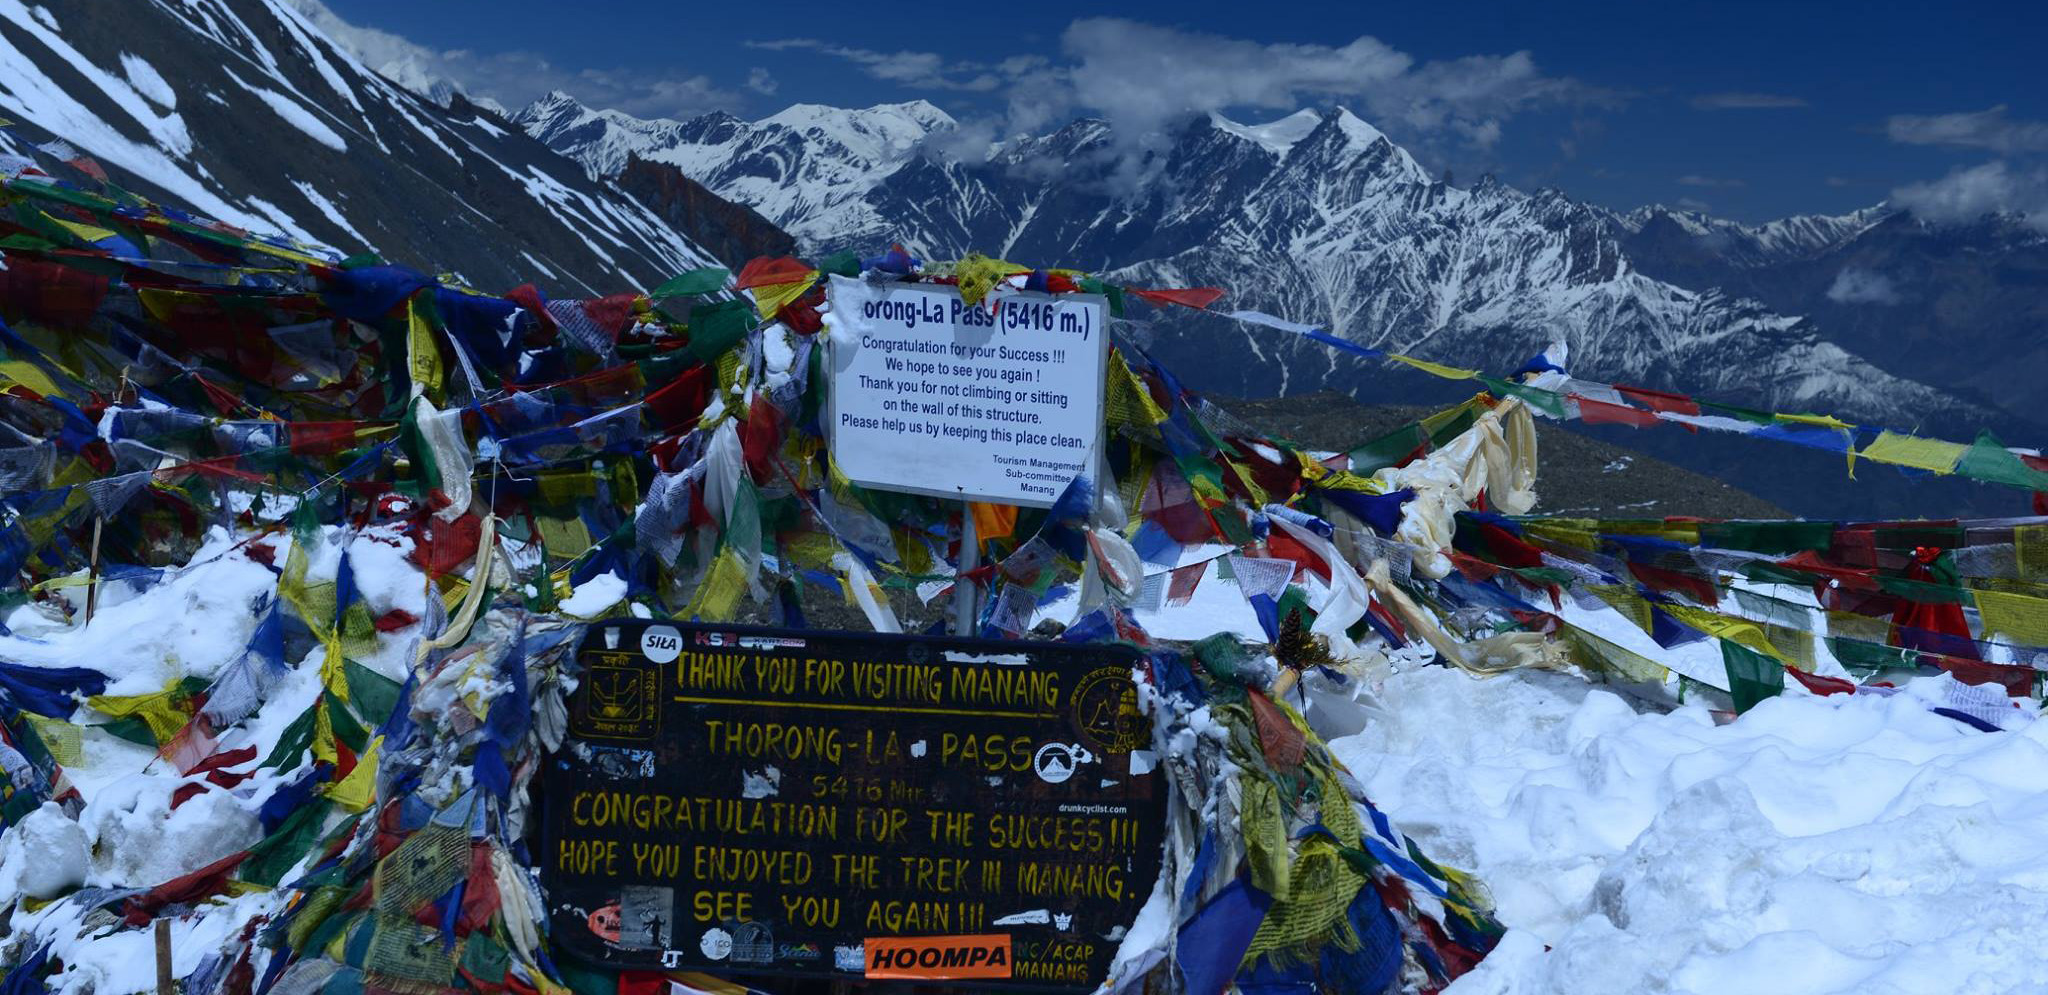 Annapurna Circuit with Tilicho Lake and Poon Hill